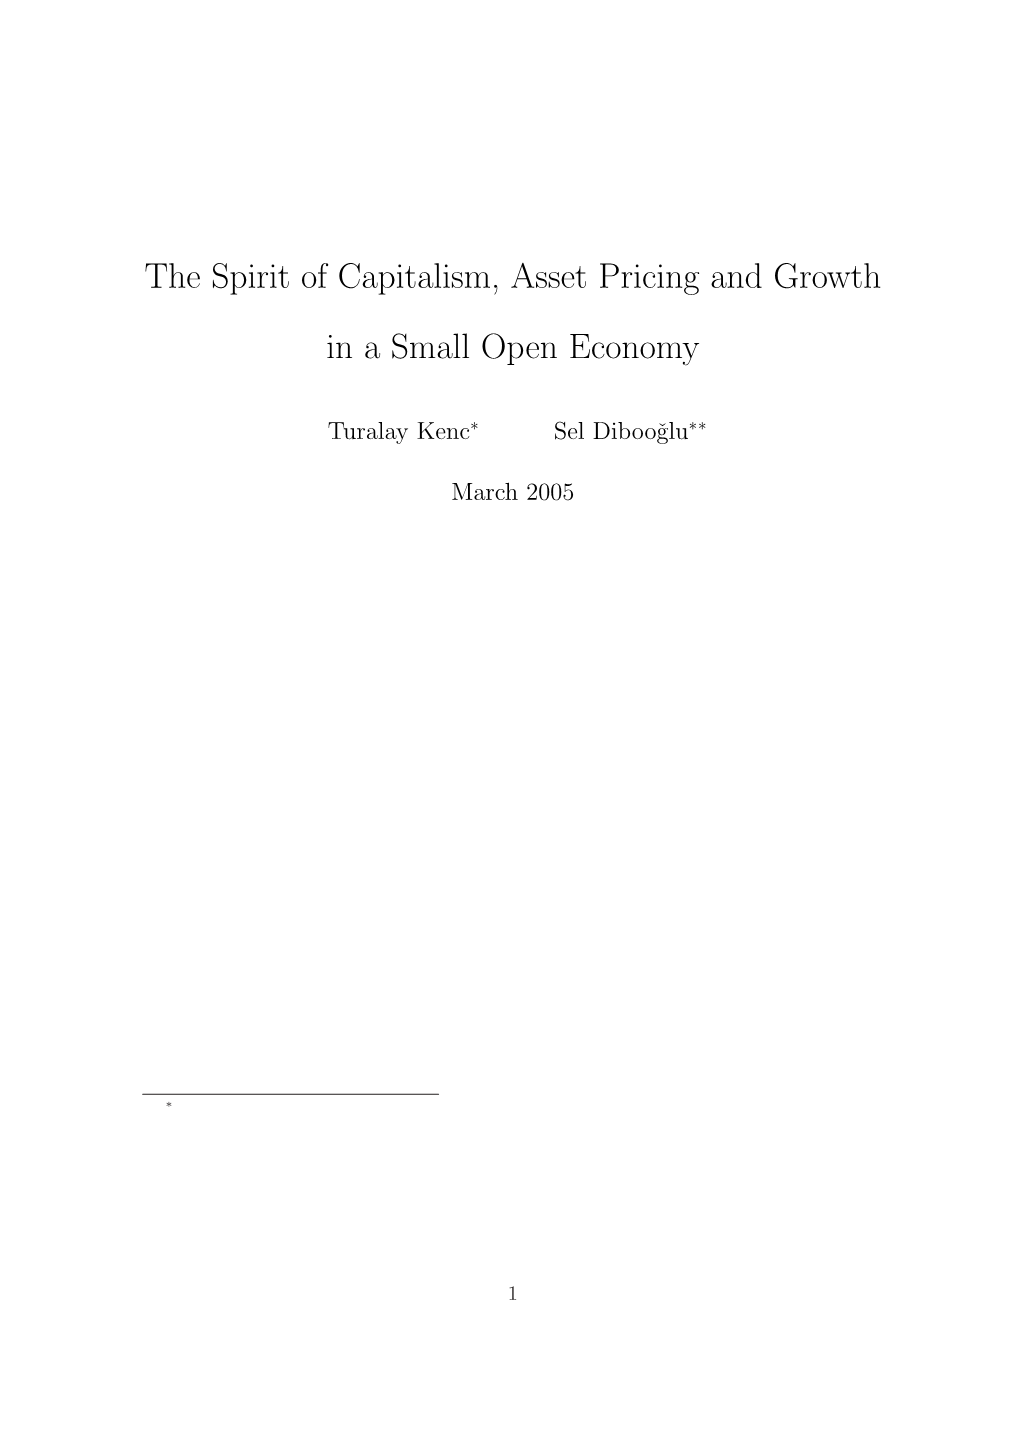 The Spirit of Capitalism, Asset Pricing and Growth in a Small Open Economy